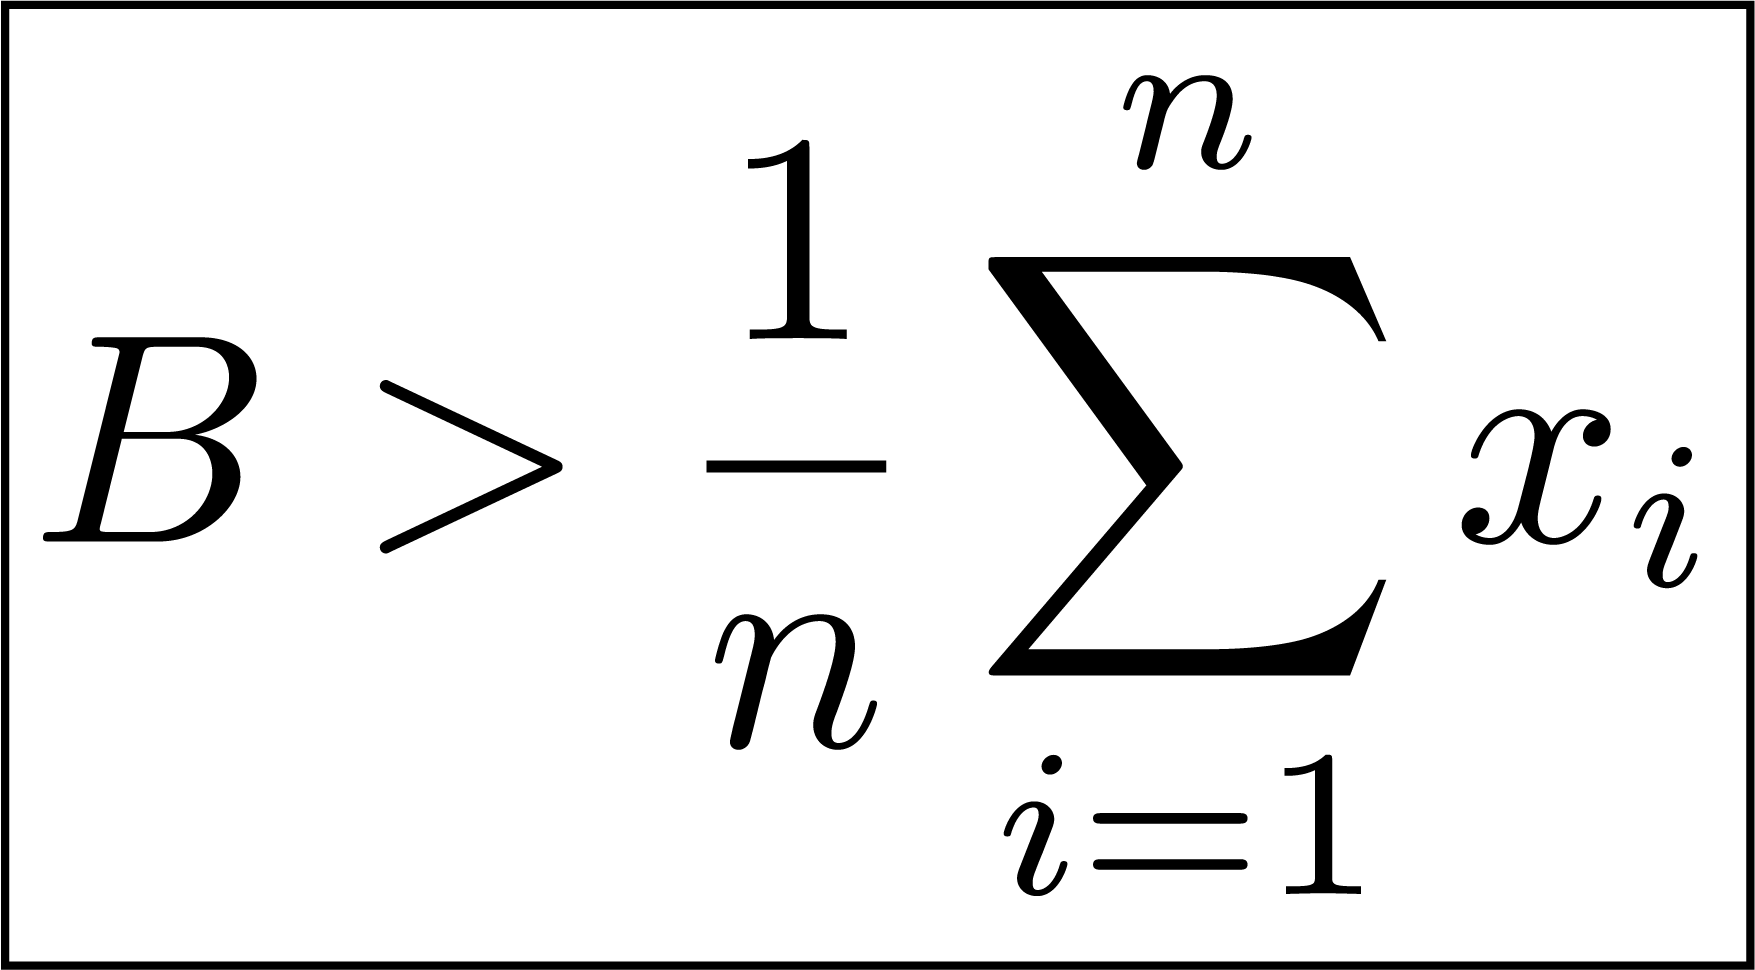 An inequality showing that capital B is greater than a mathematical expression. The mathematical expression consists of a capital greek letter Sigma with the equality i=1 below it and the variable n on top of it. To the left of the letter Sigma there is the fraction 1 over n.  To the right of the sigma there is the term x subscript i.